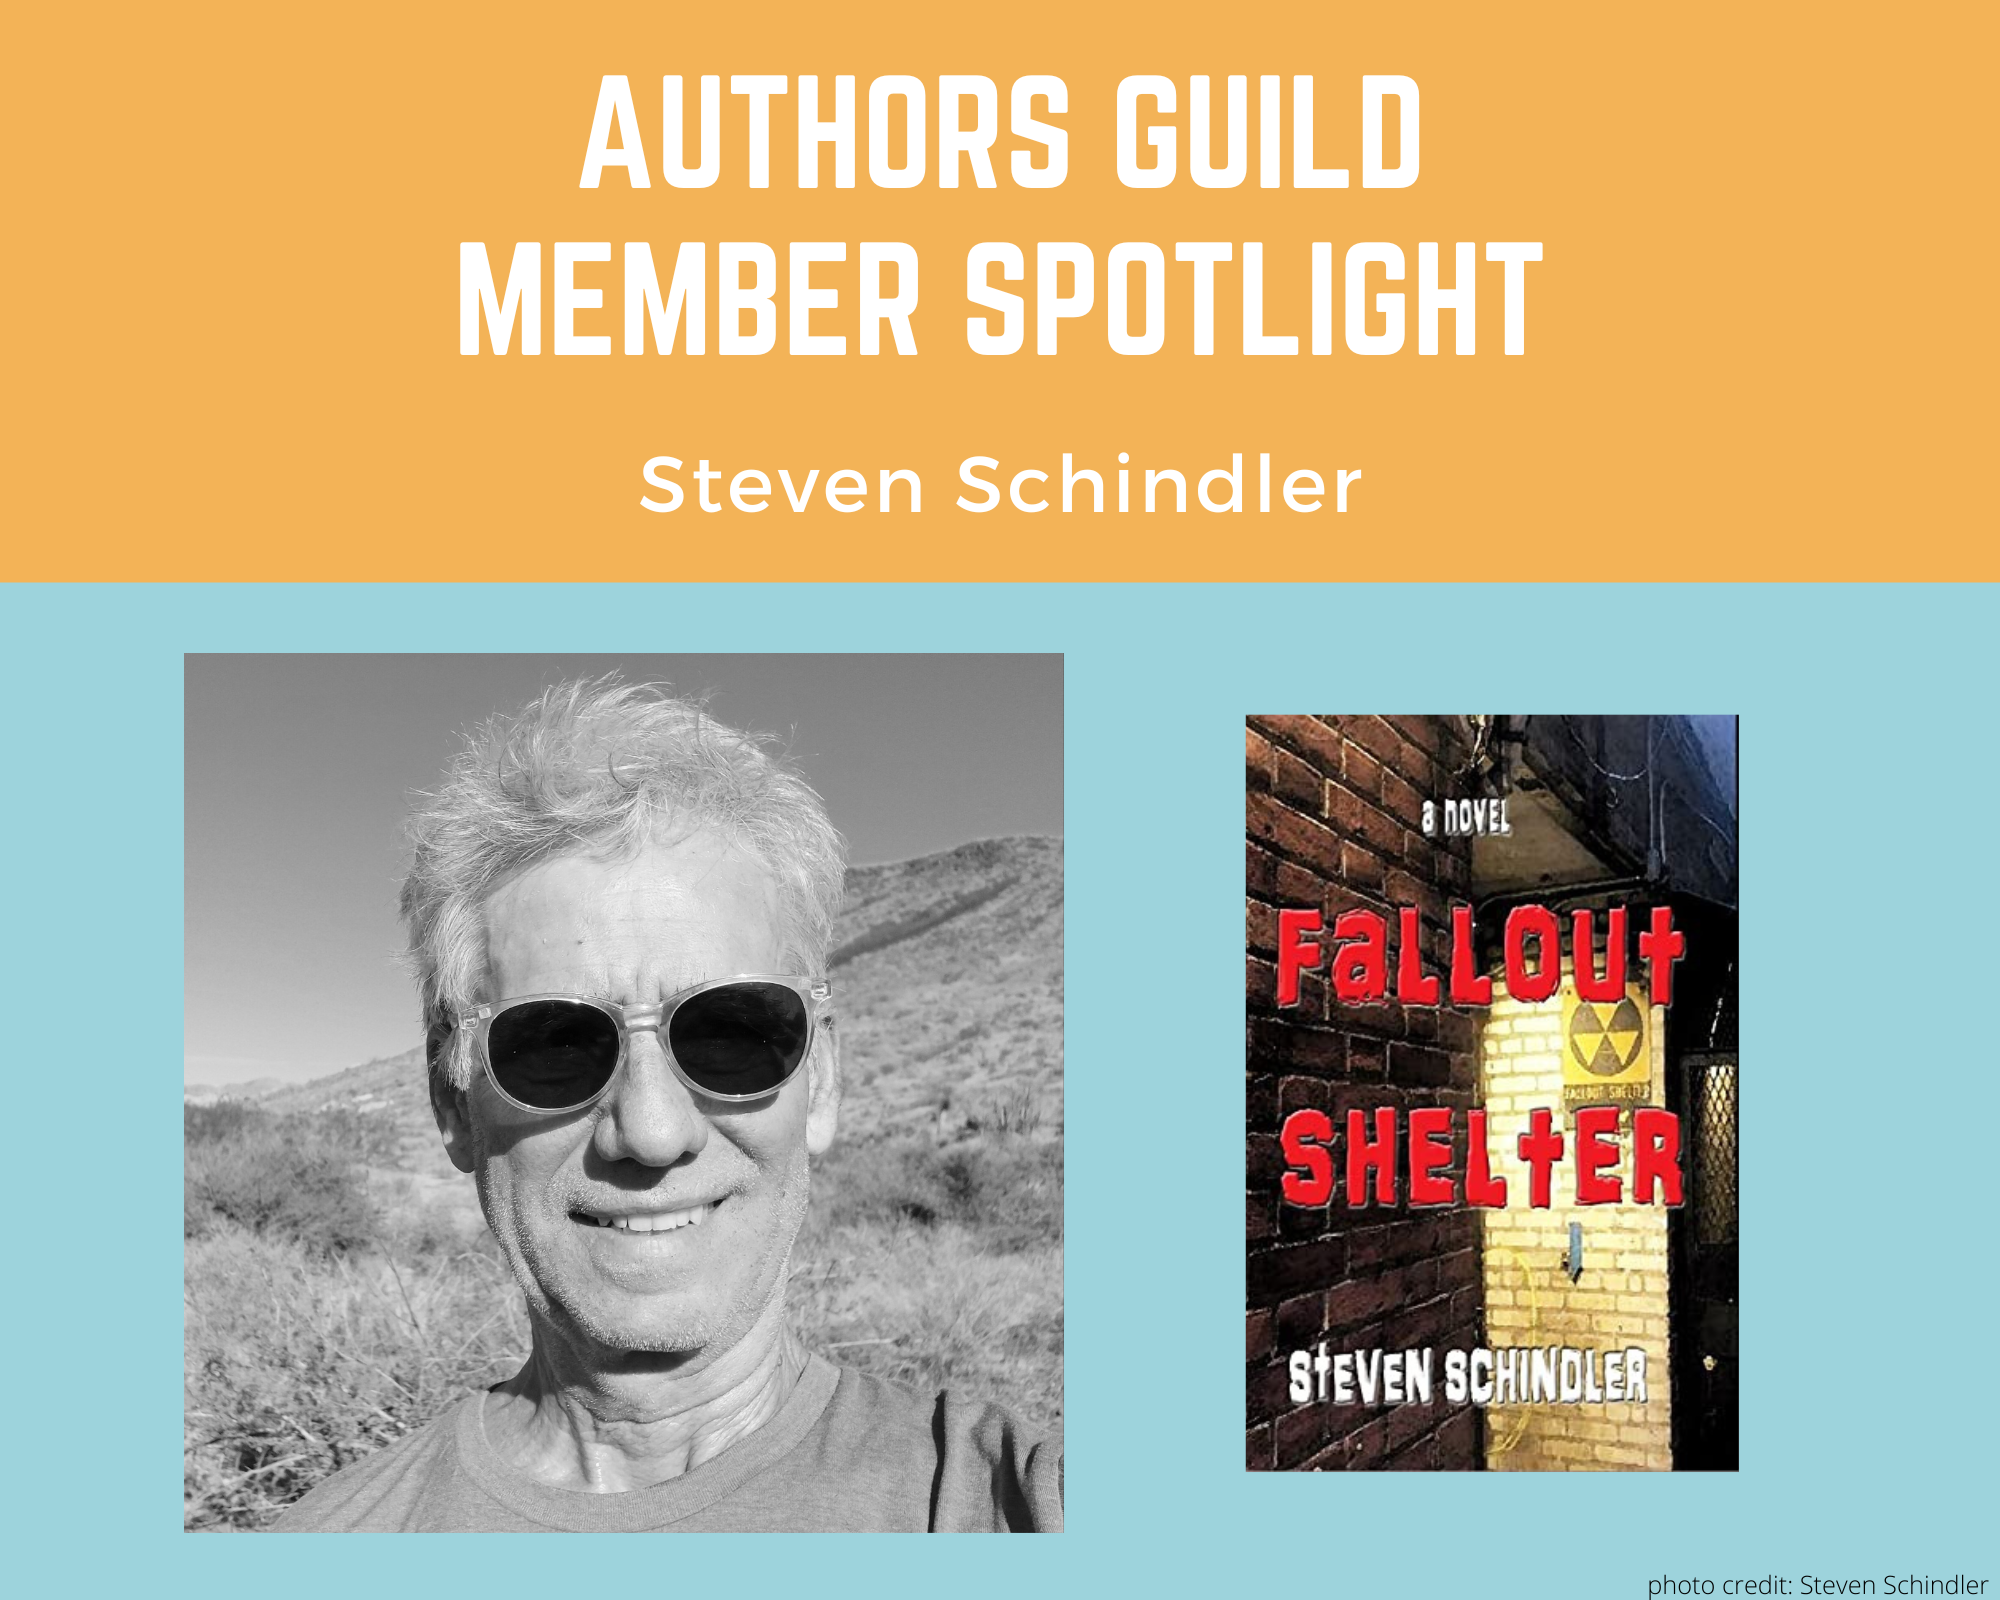 black and white photo of author Steven Schindler and an image of his book Fallout Shelter